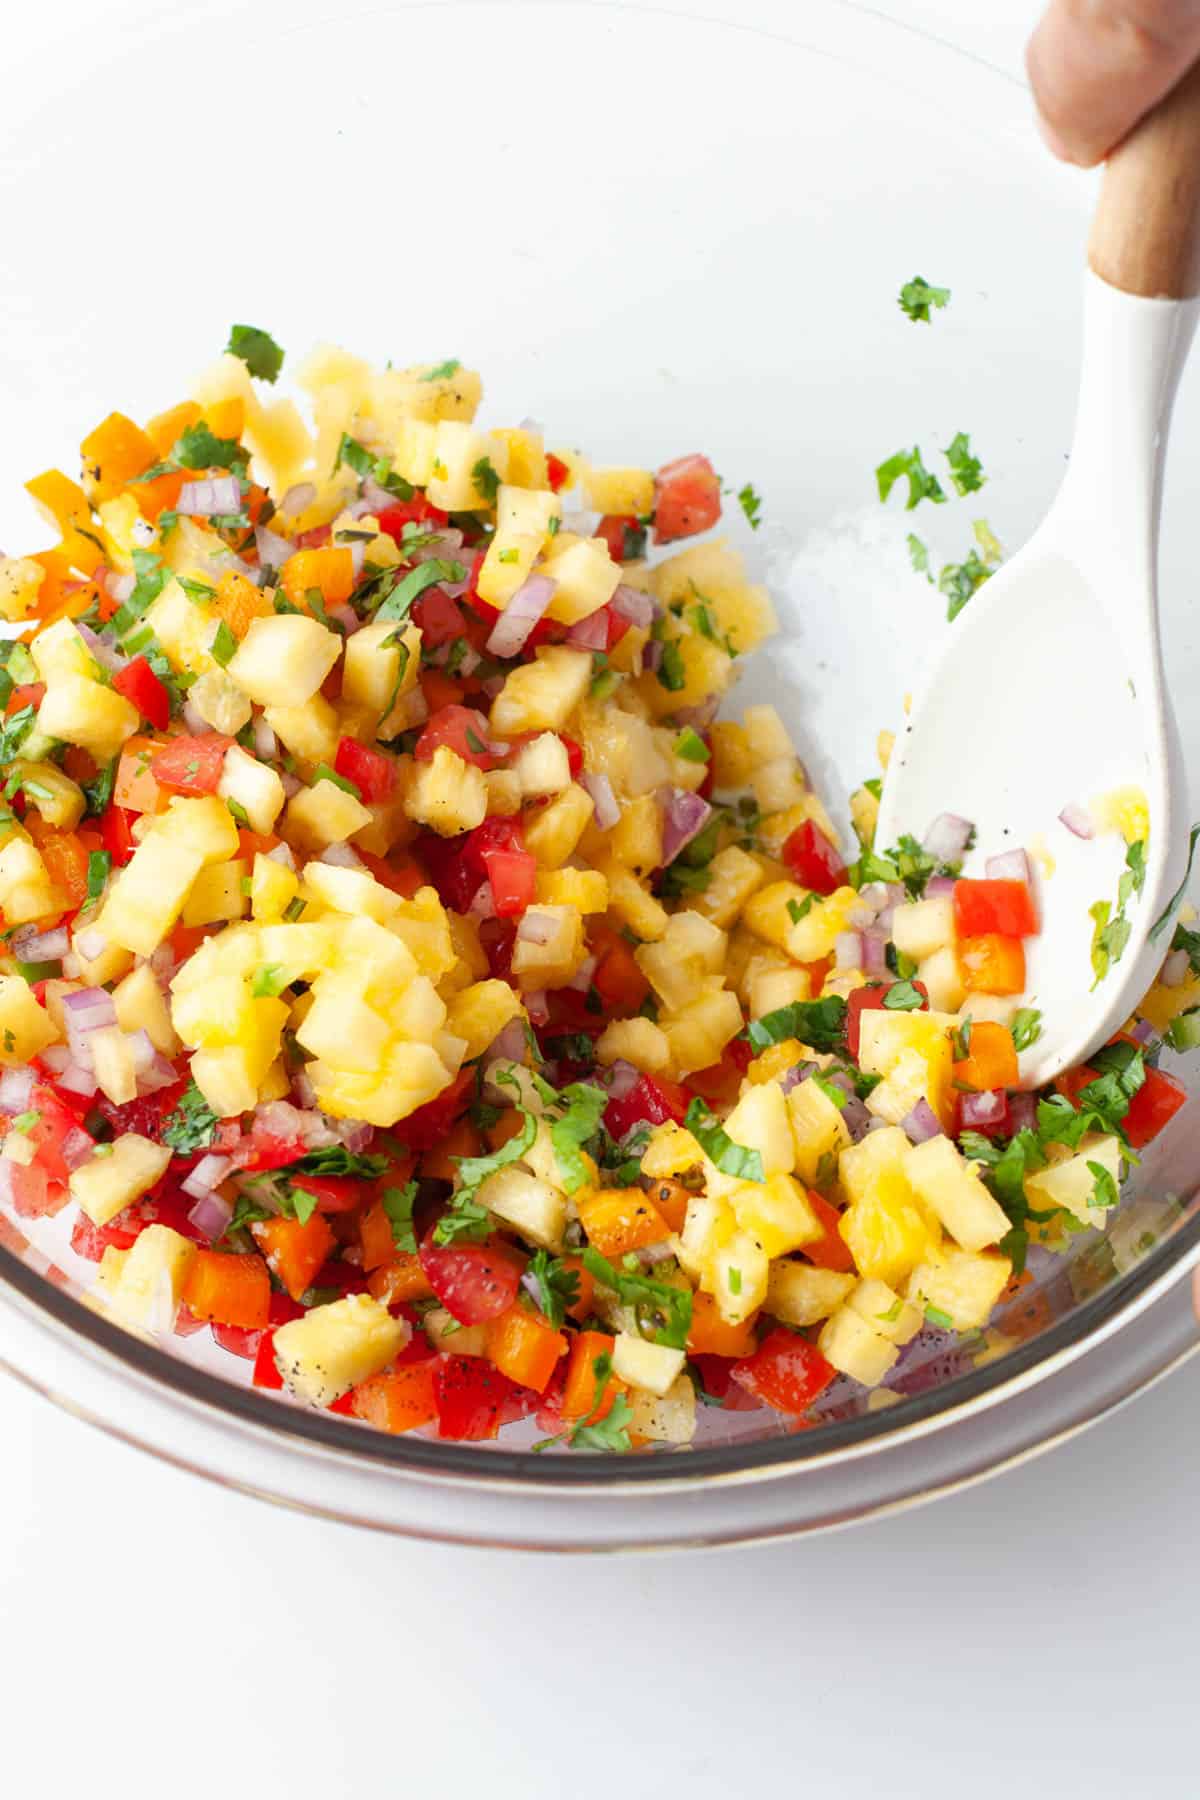 A spoon stirring pineapple salsa ingredients together in a large glass bowl.